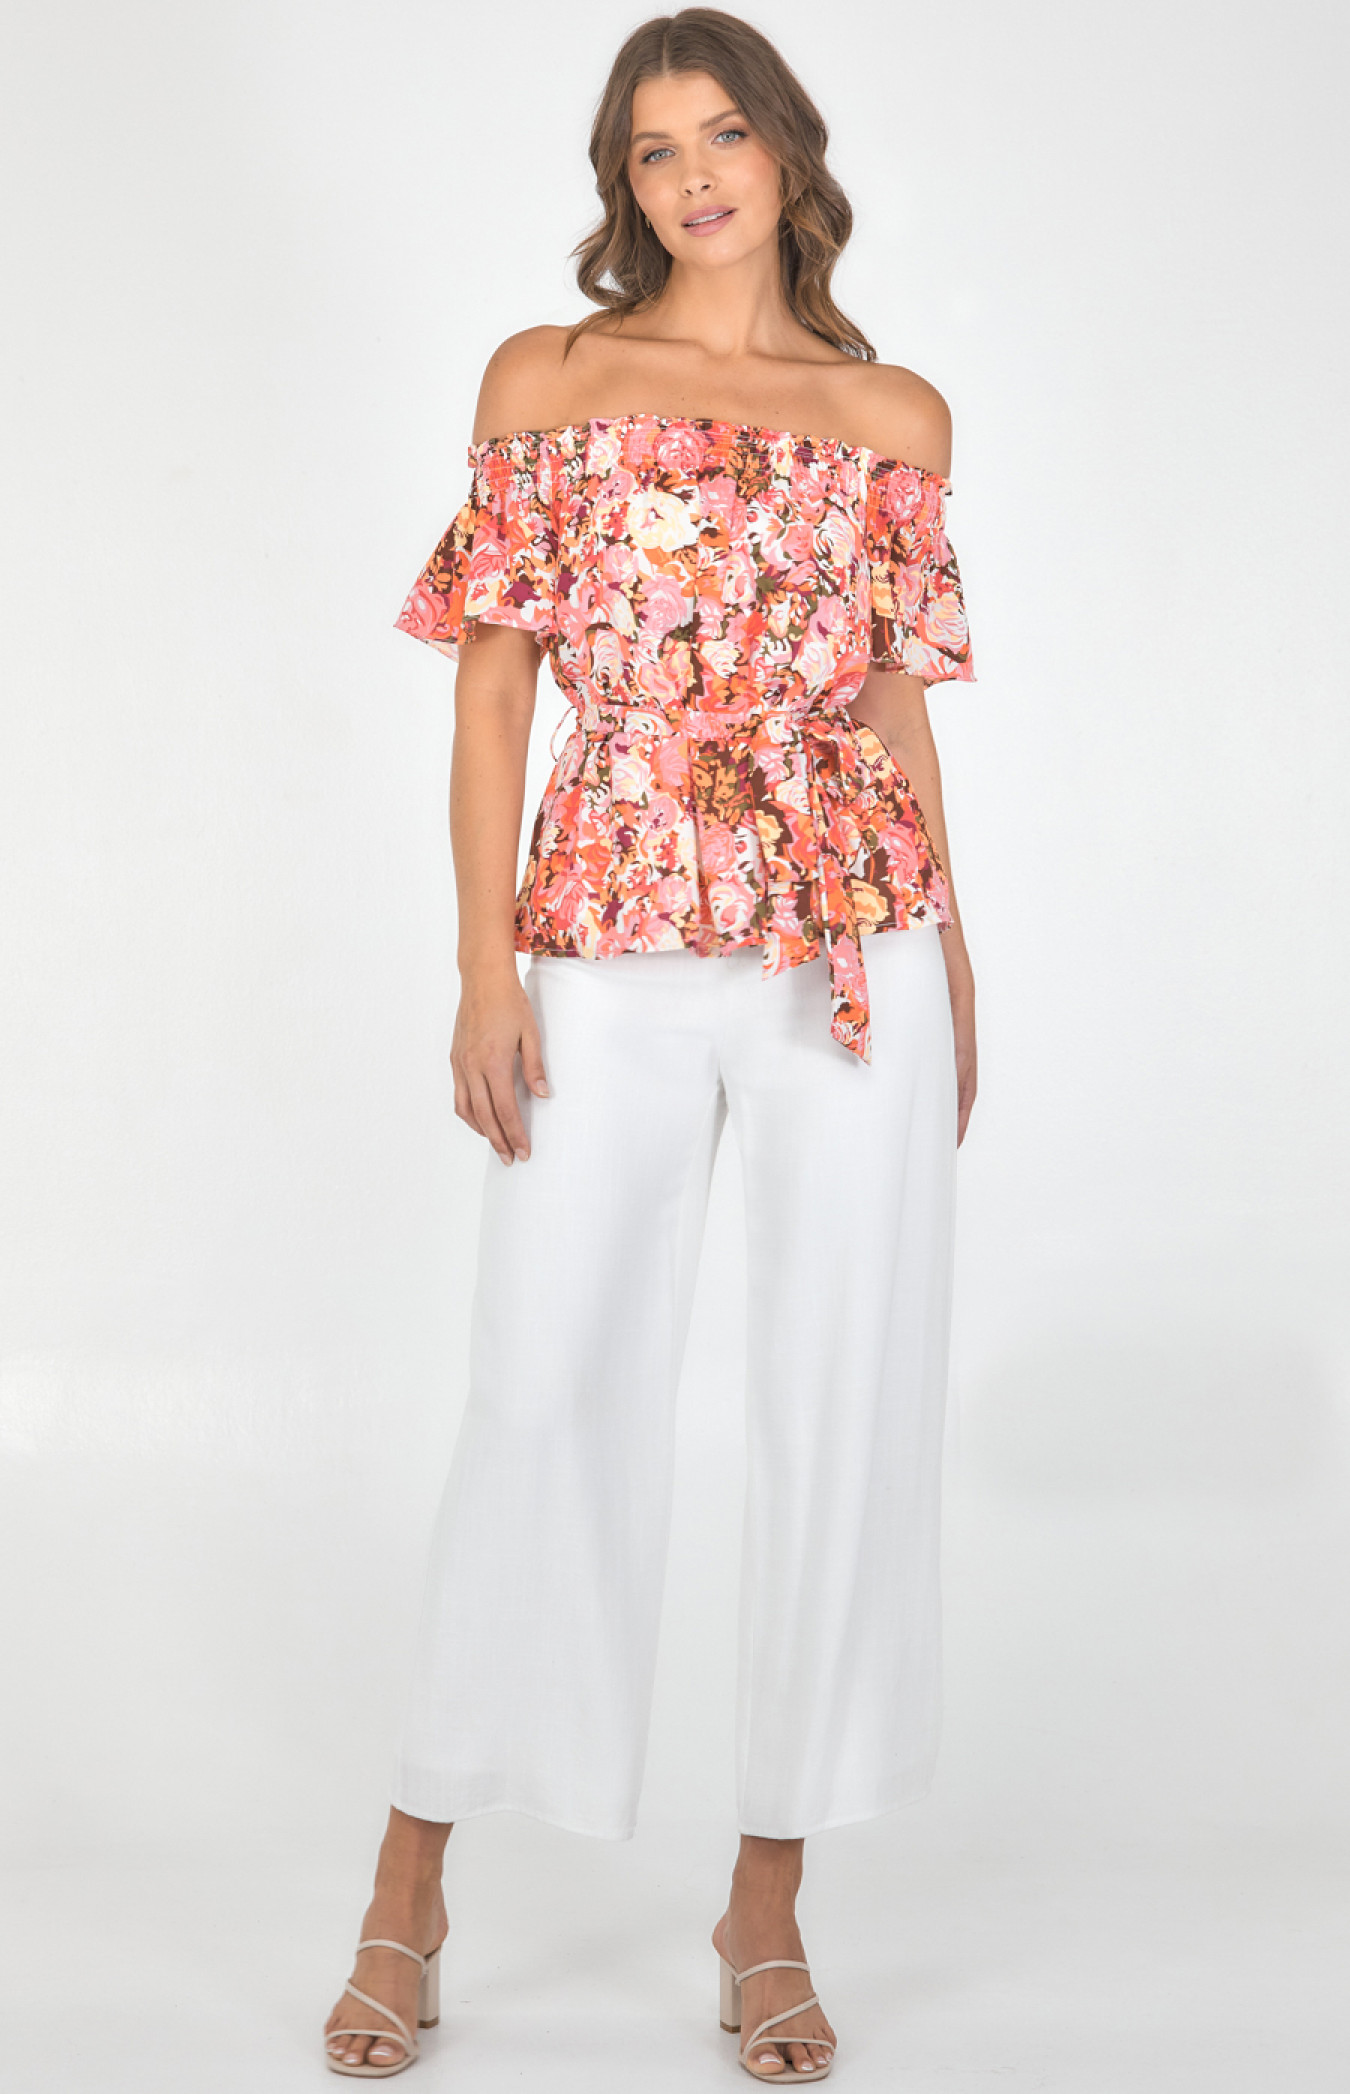 Floral Print Off the Shoulder Top with Belt (STO582B)